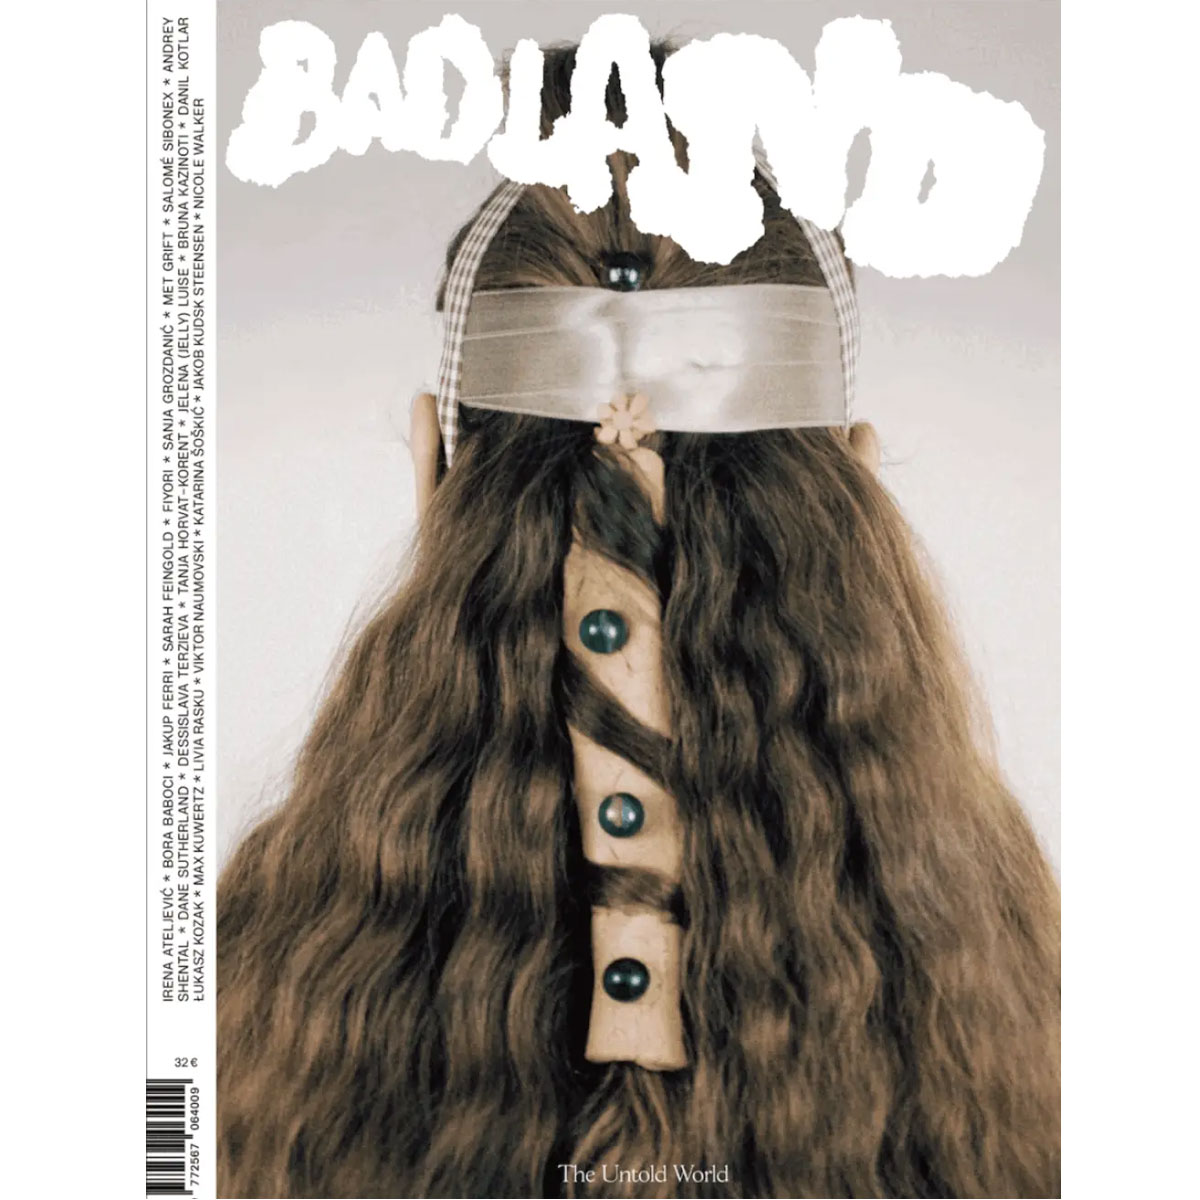 This is Badland Issue 06 The Untold World